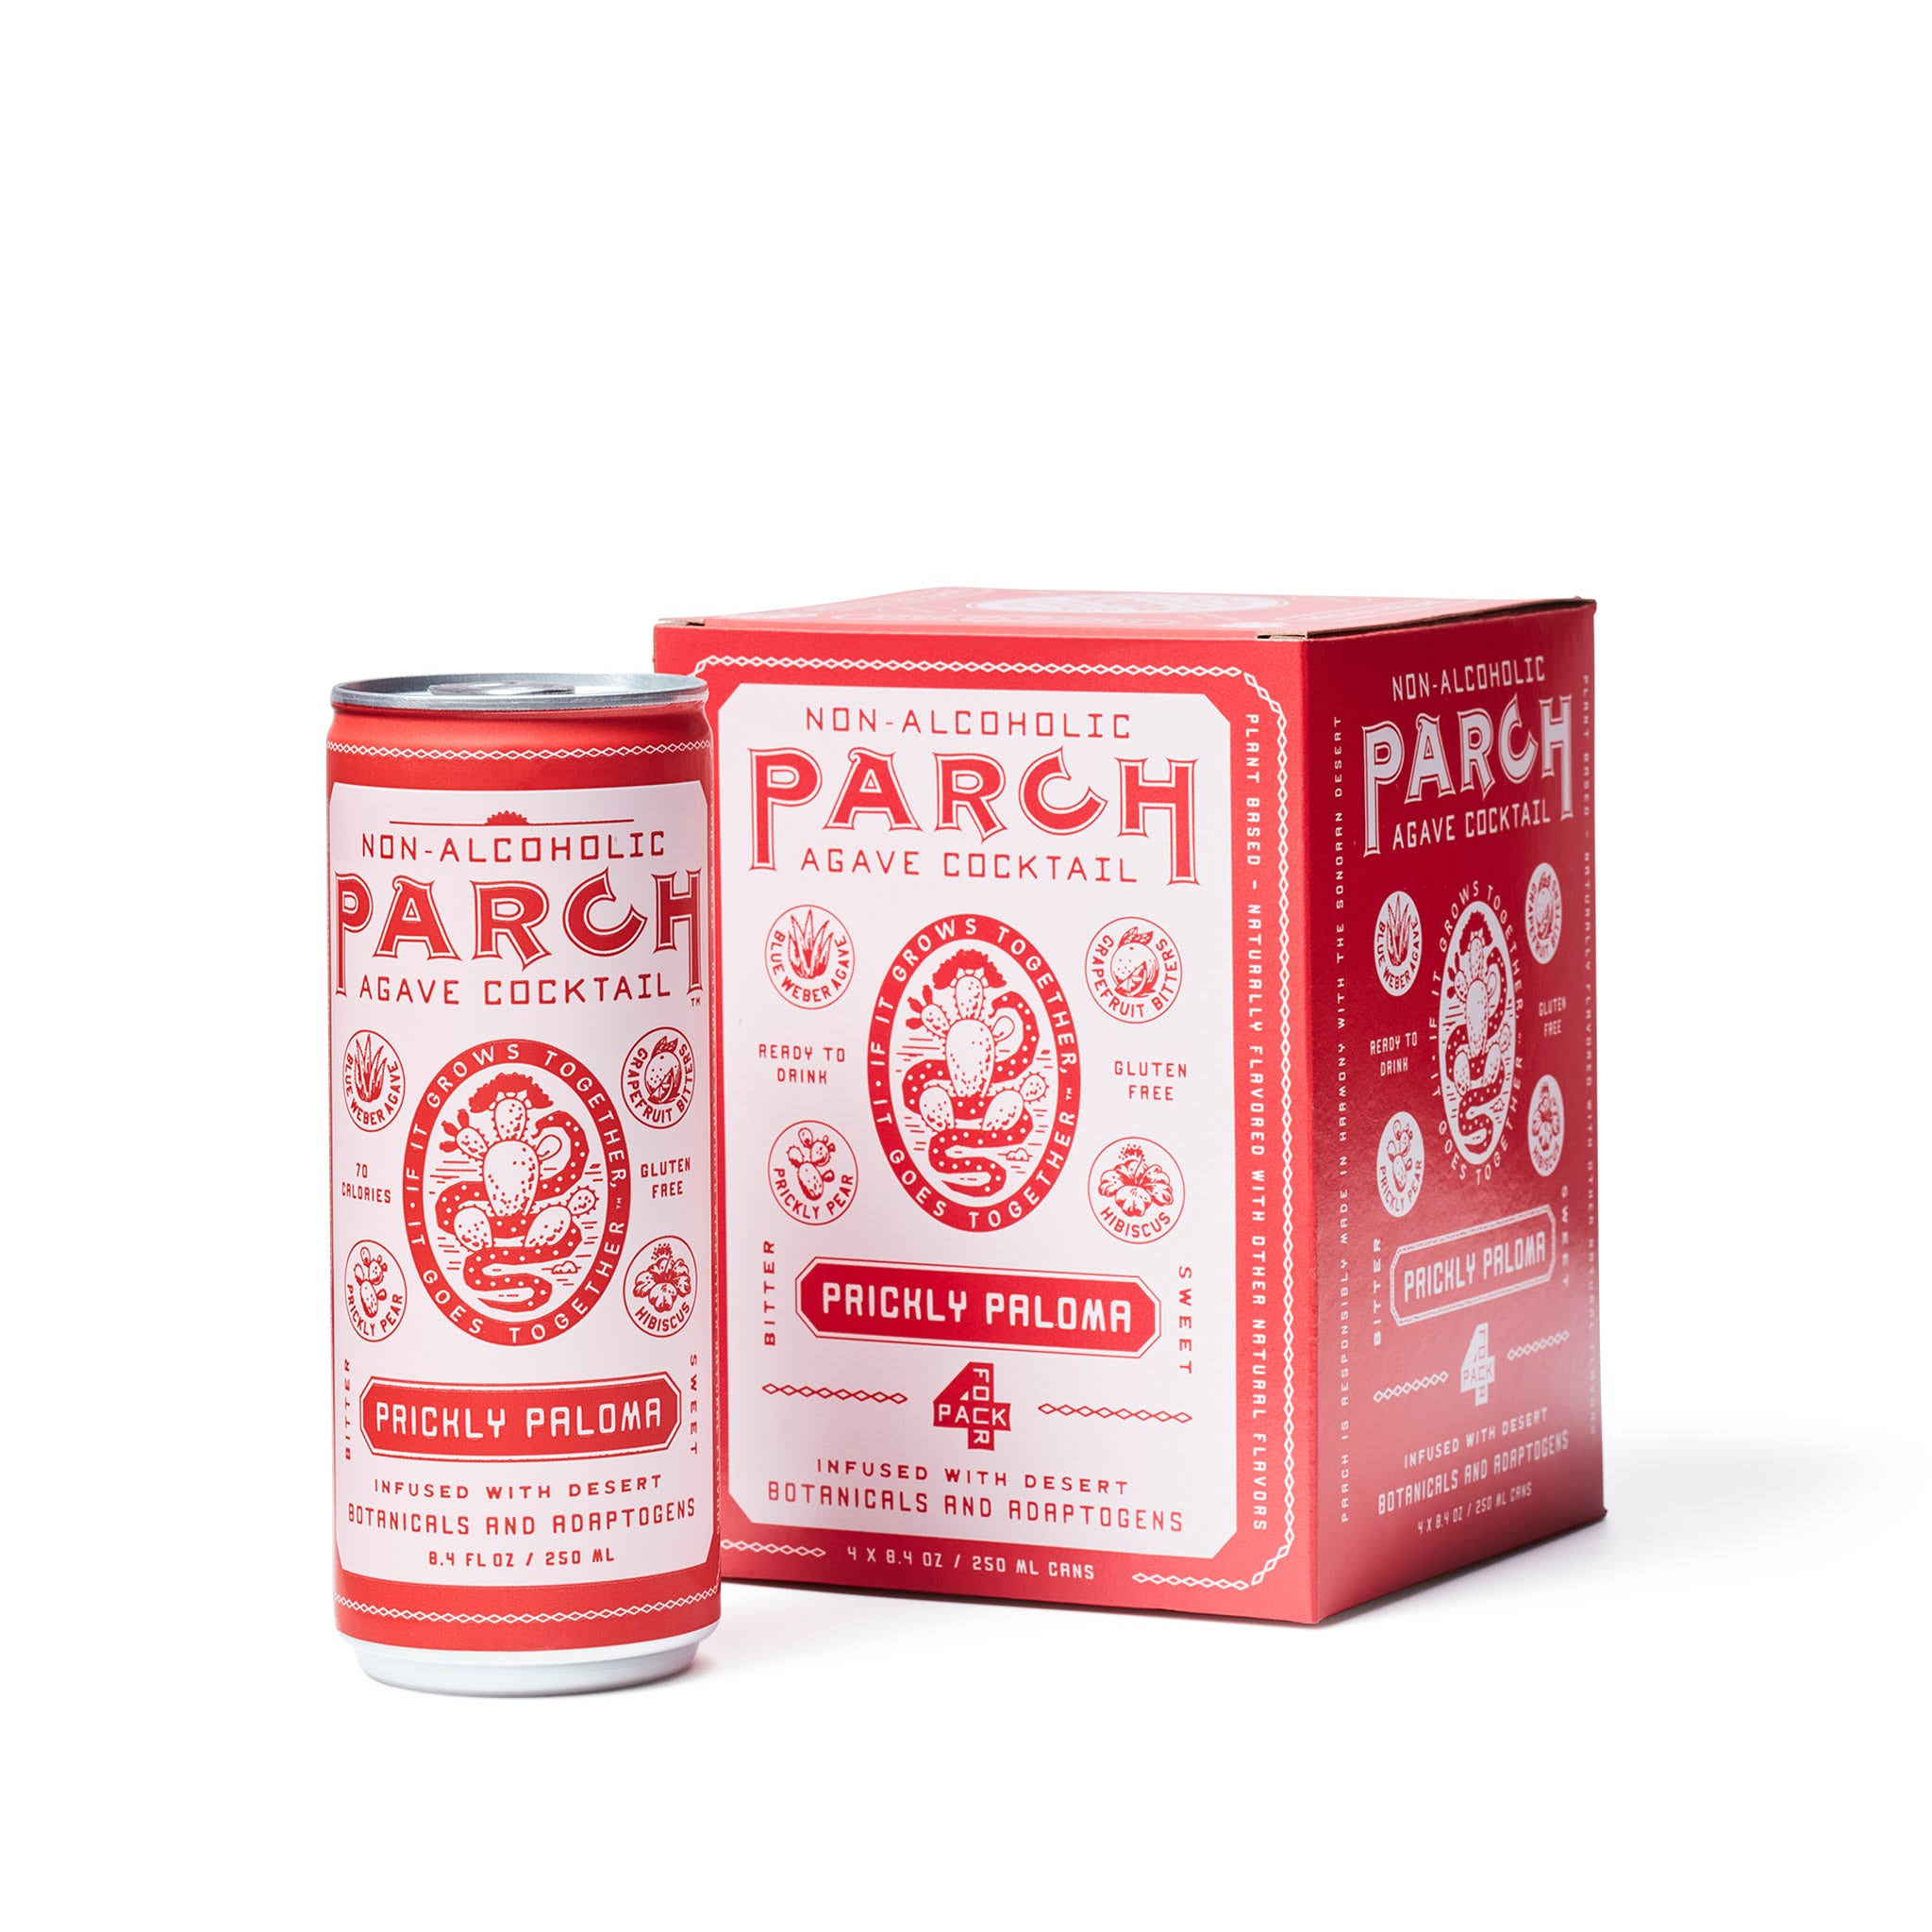 Parch Agave Cocktail Prickly Paloma 4 Pack